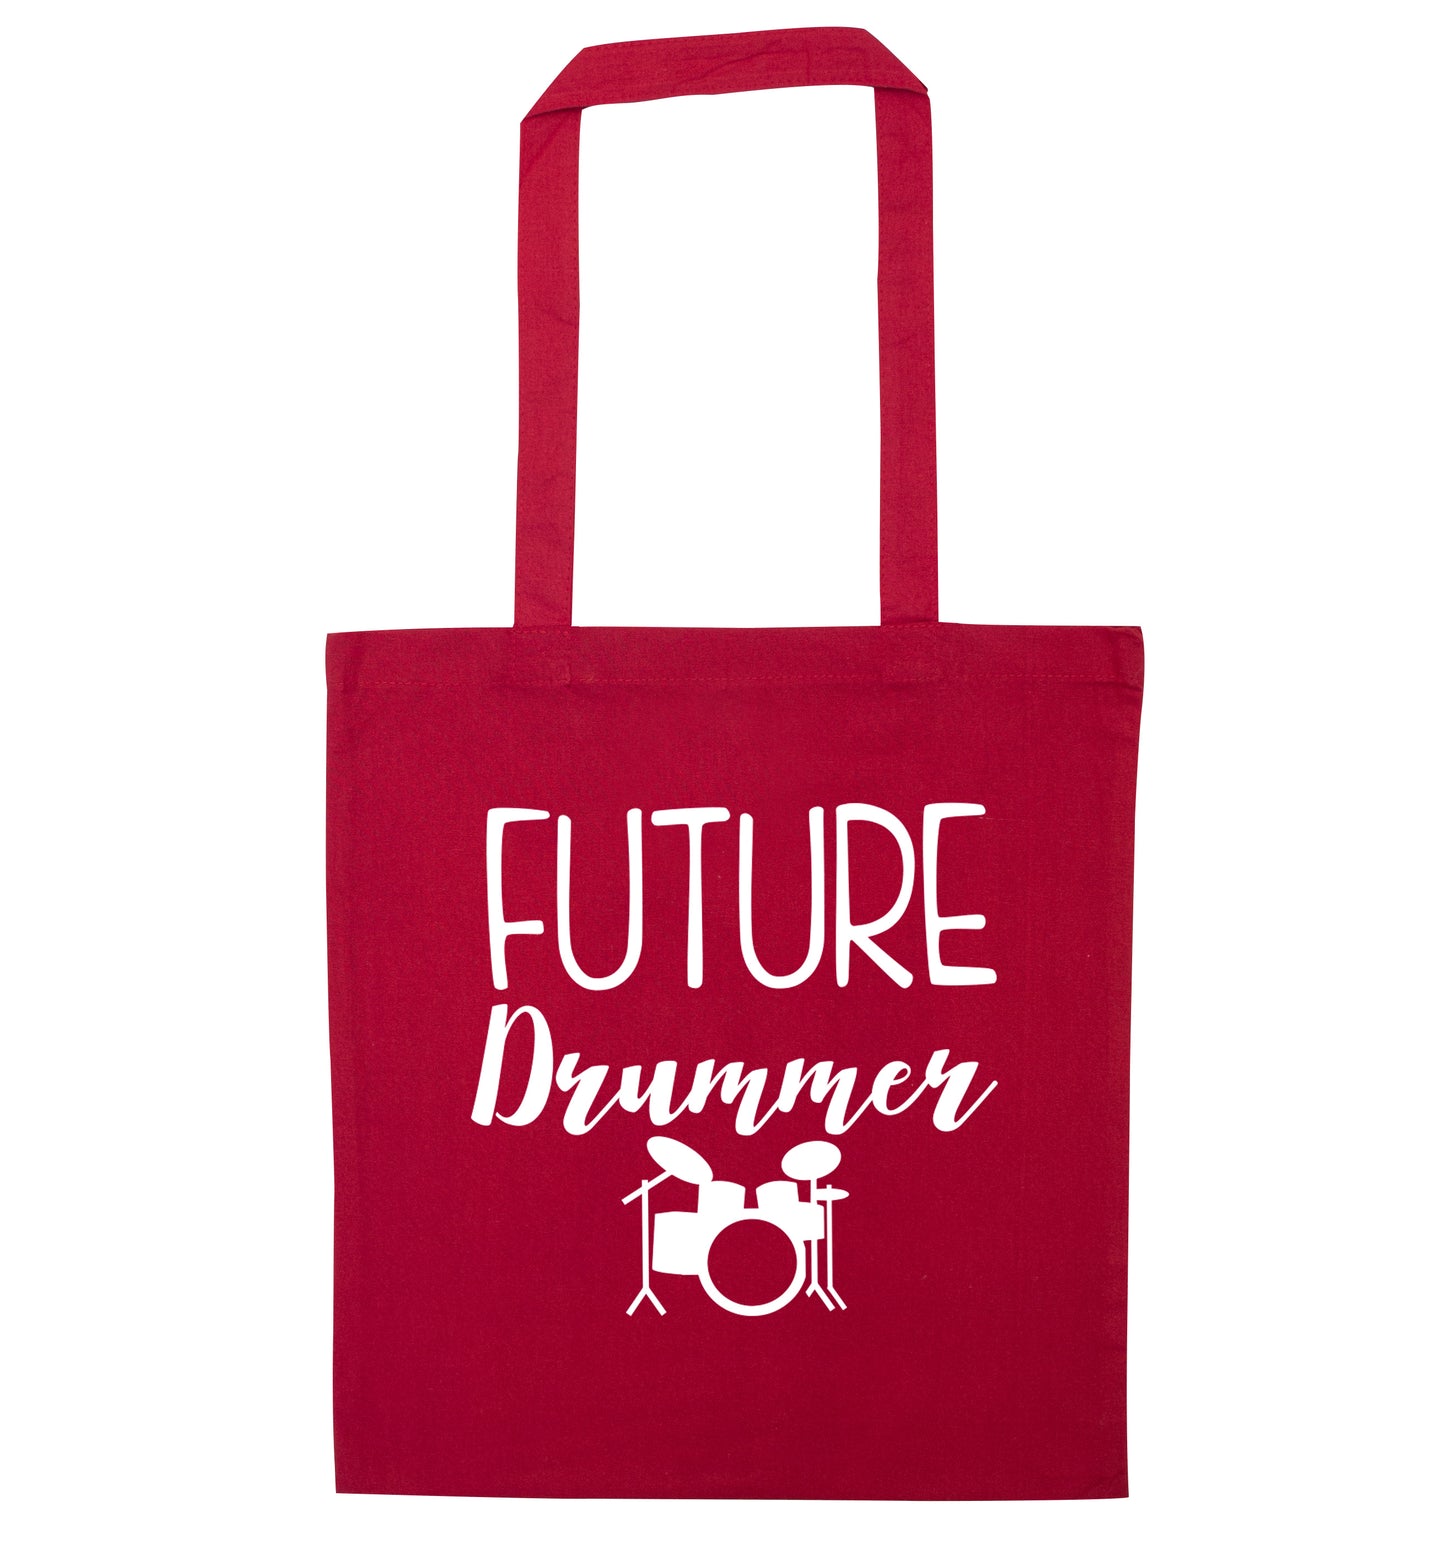 Future drummer red tote bag